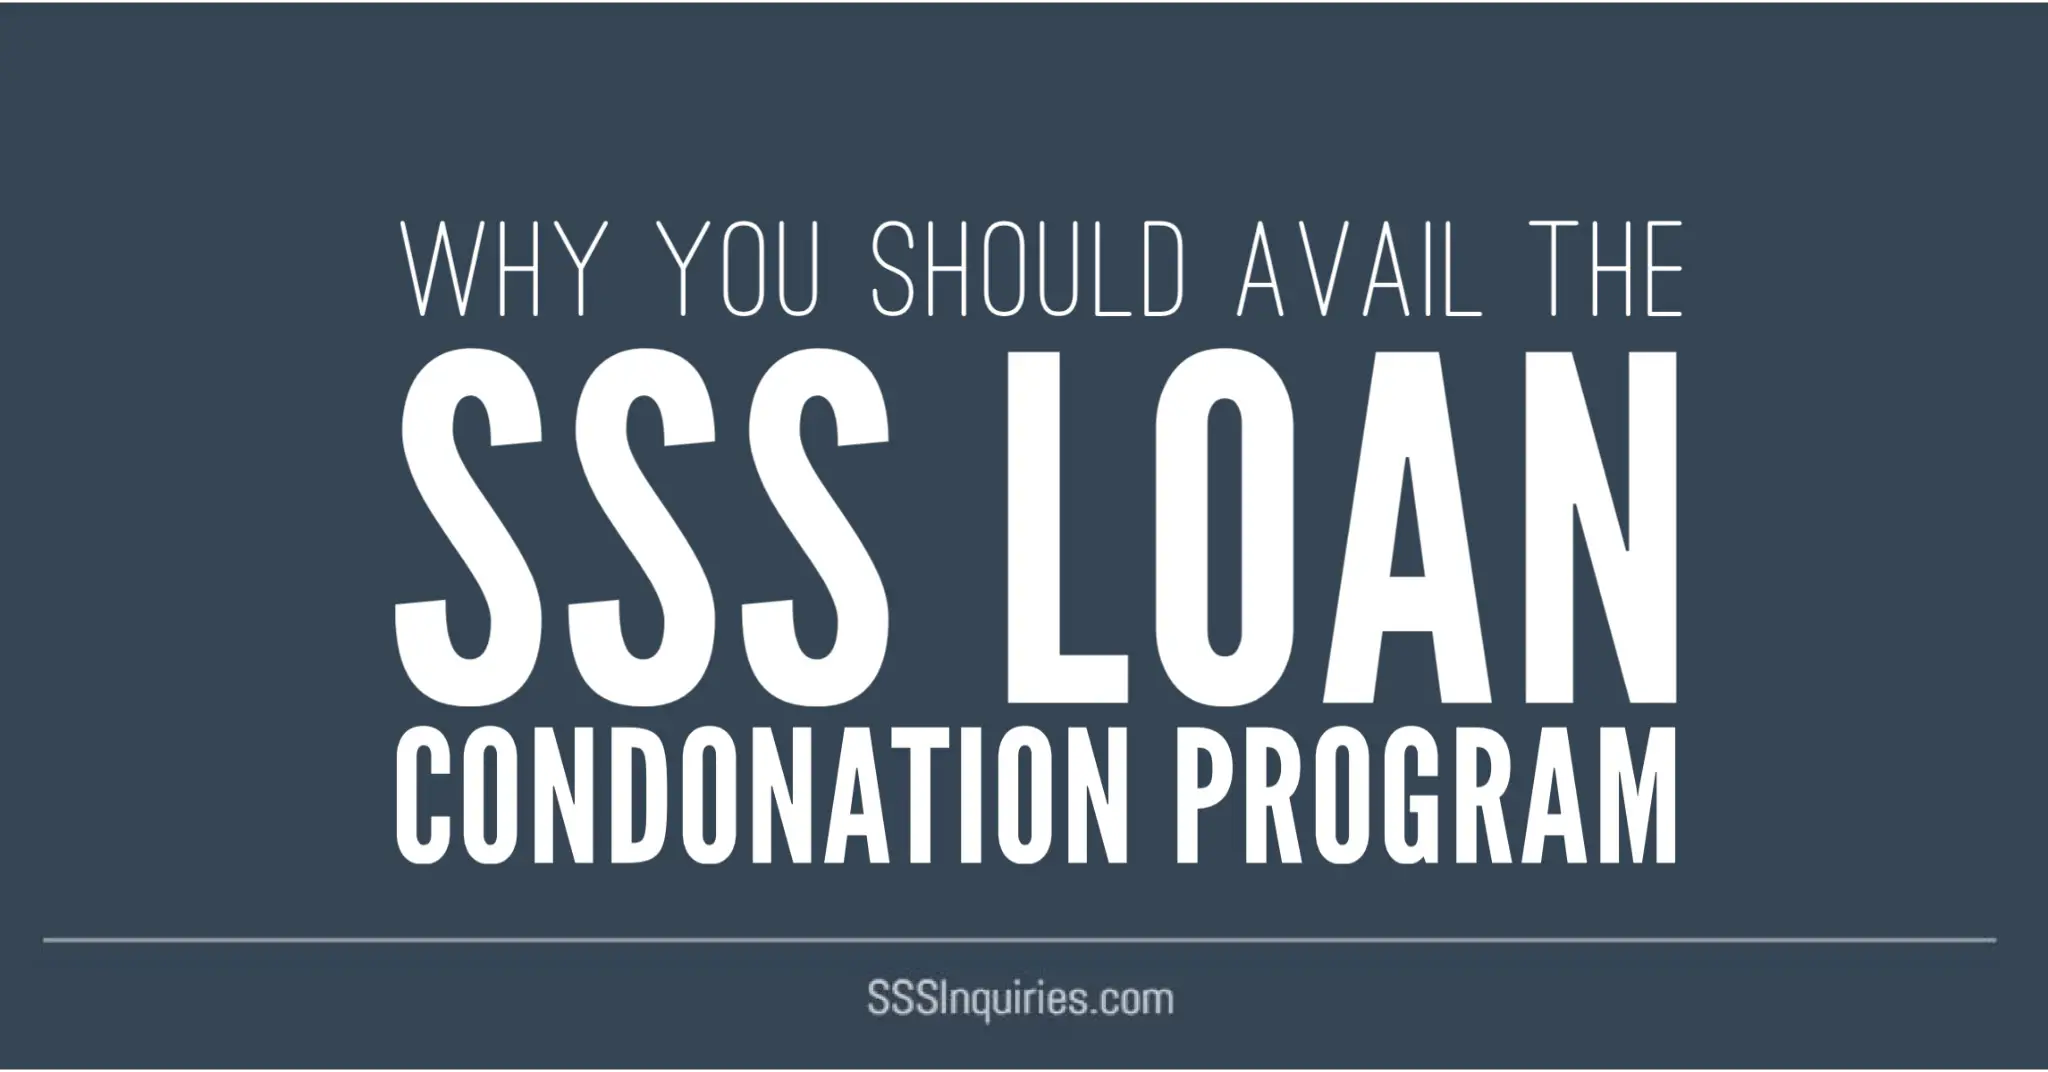 Why you should avail of the SSS Loan Condonation program